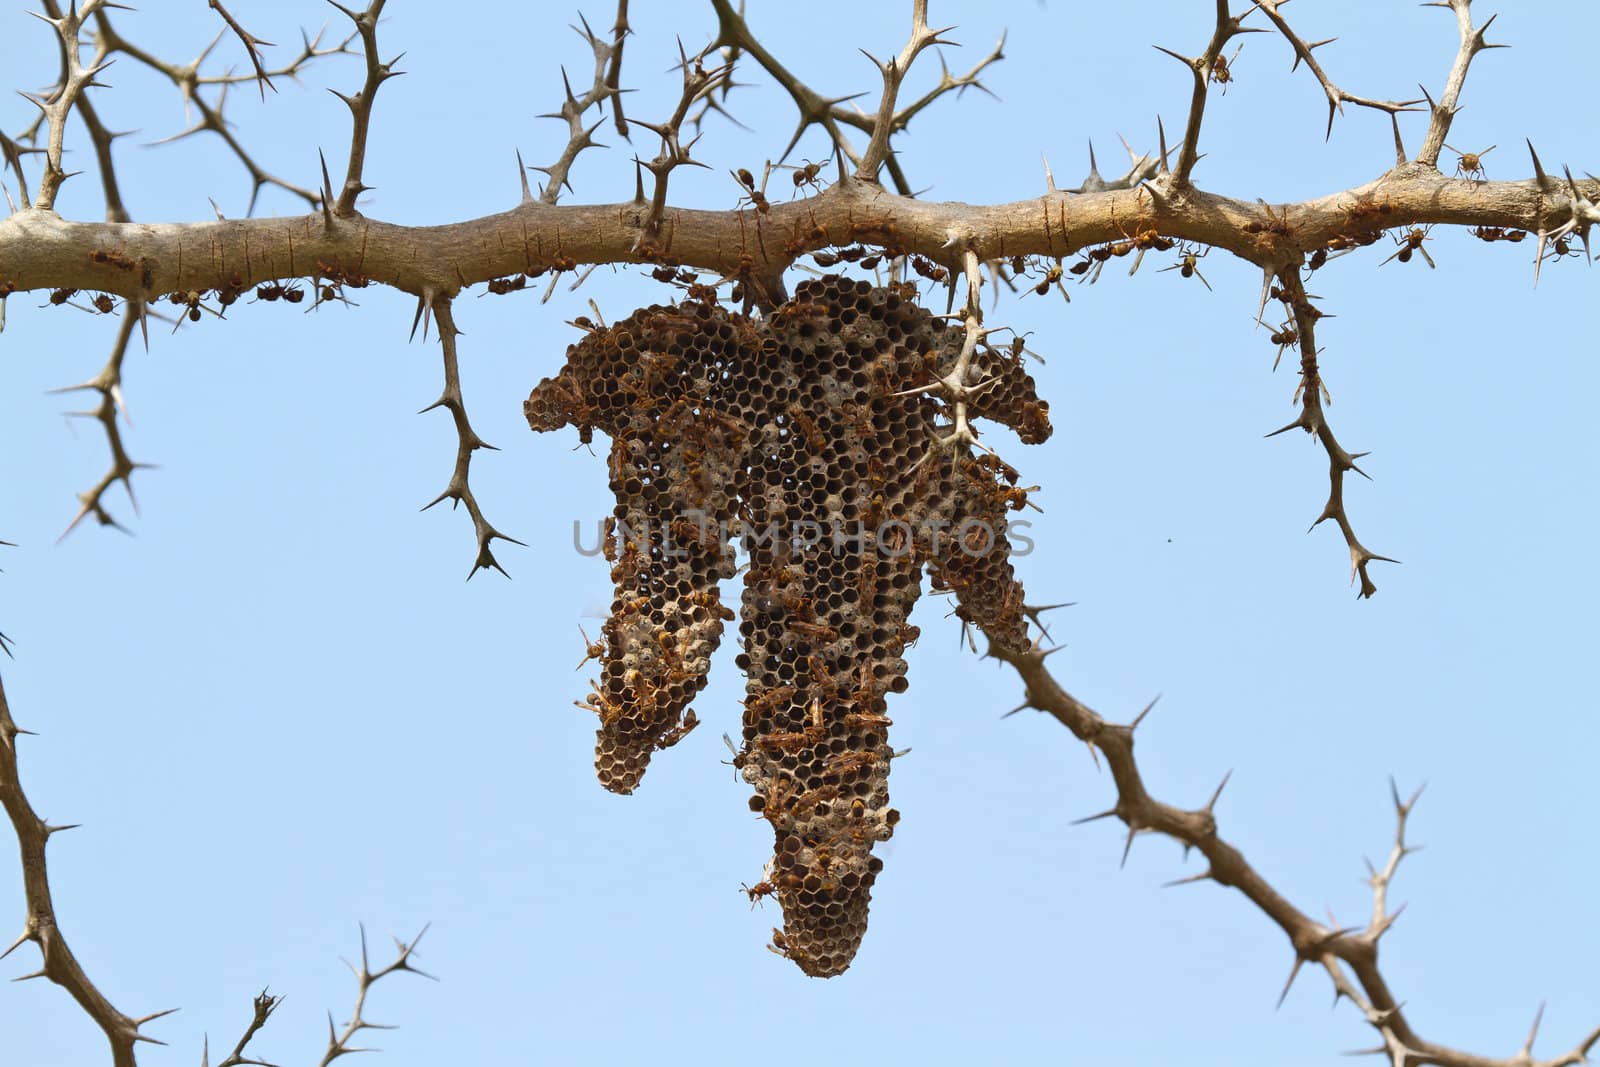 Wasp nest with different stages of larval development visible in nest cells. Adult Wasps busy around nest. Seen in Farasutu Forest, The Gambia.